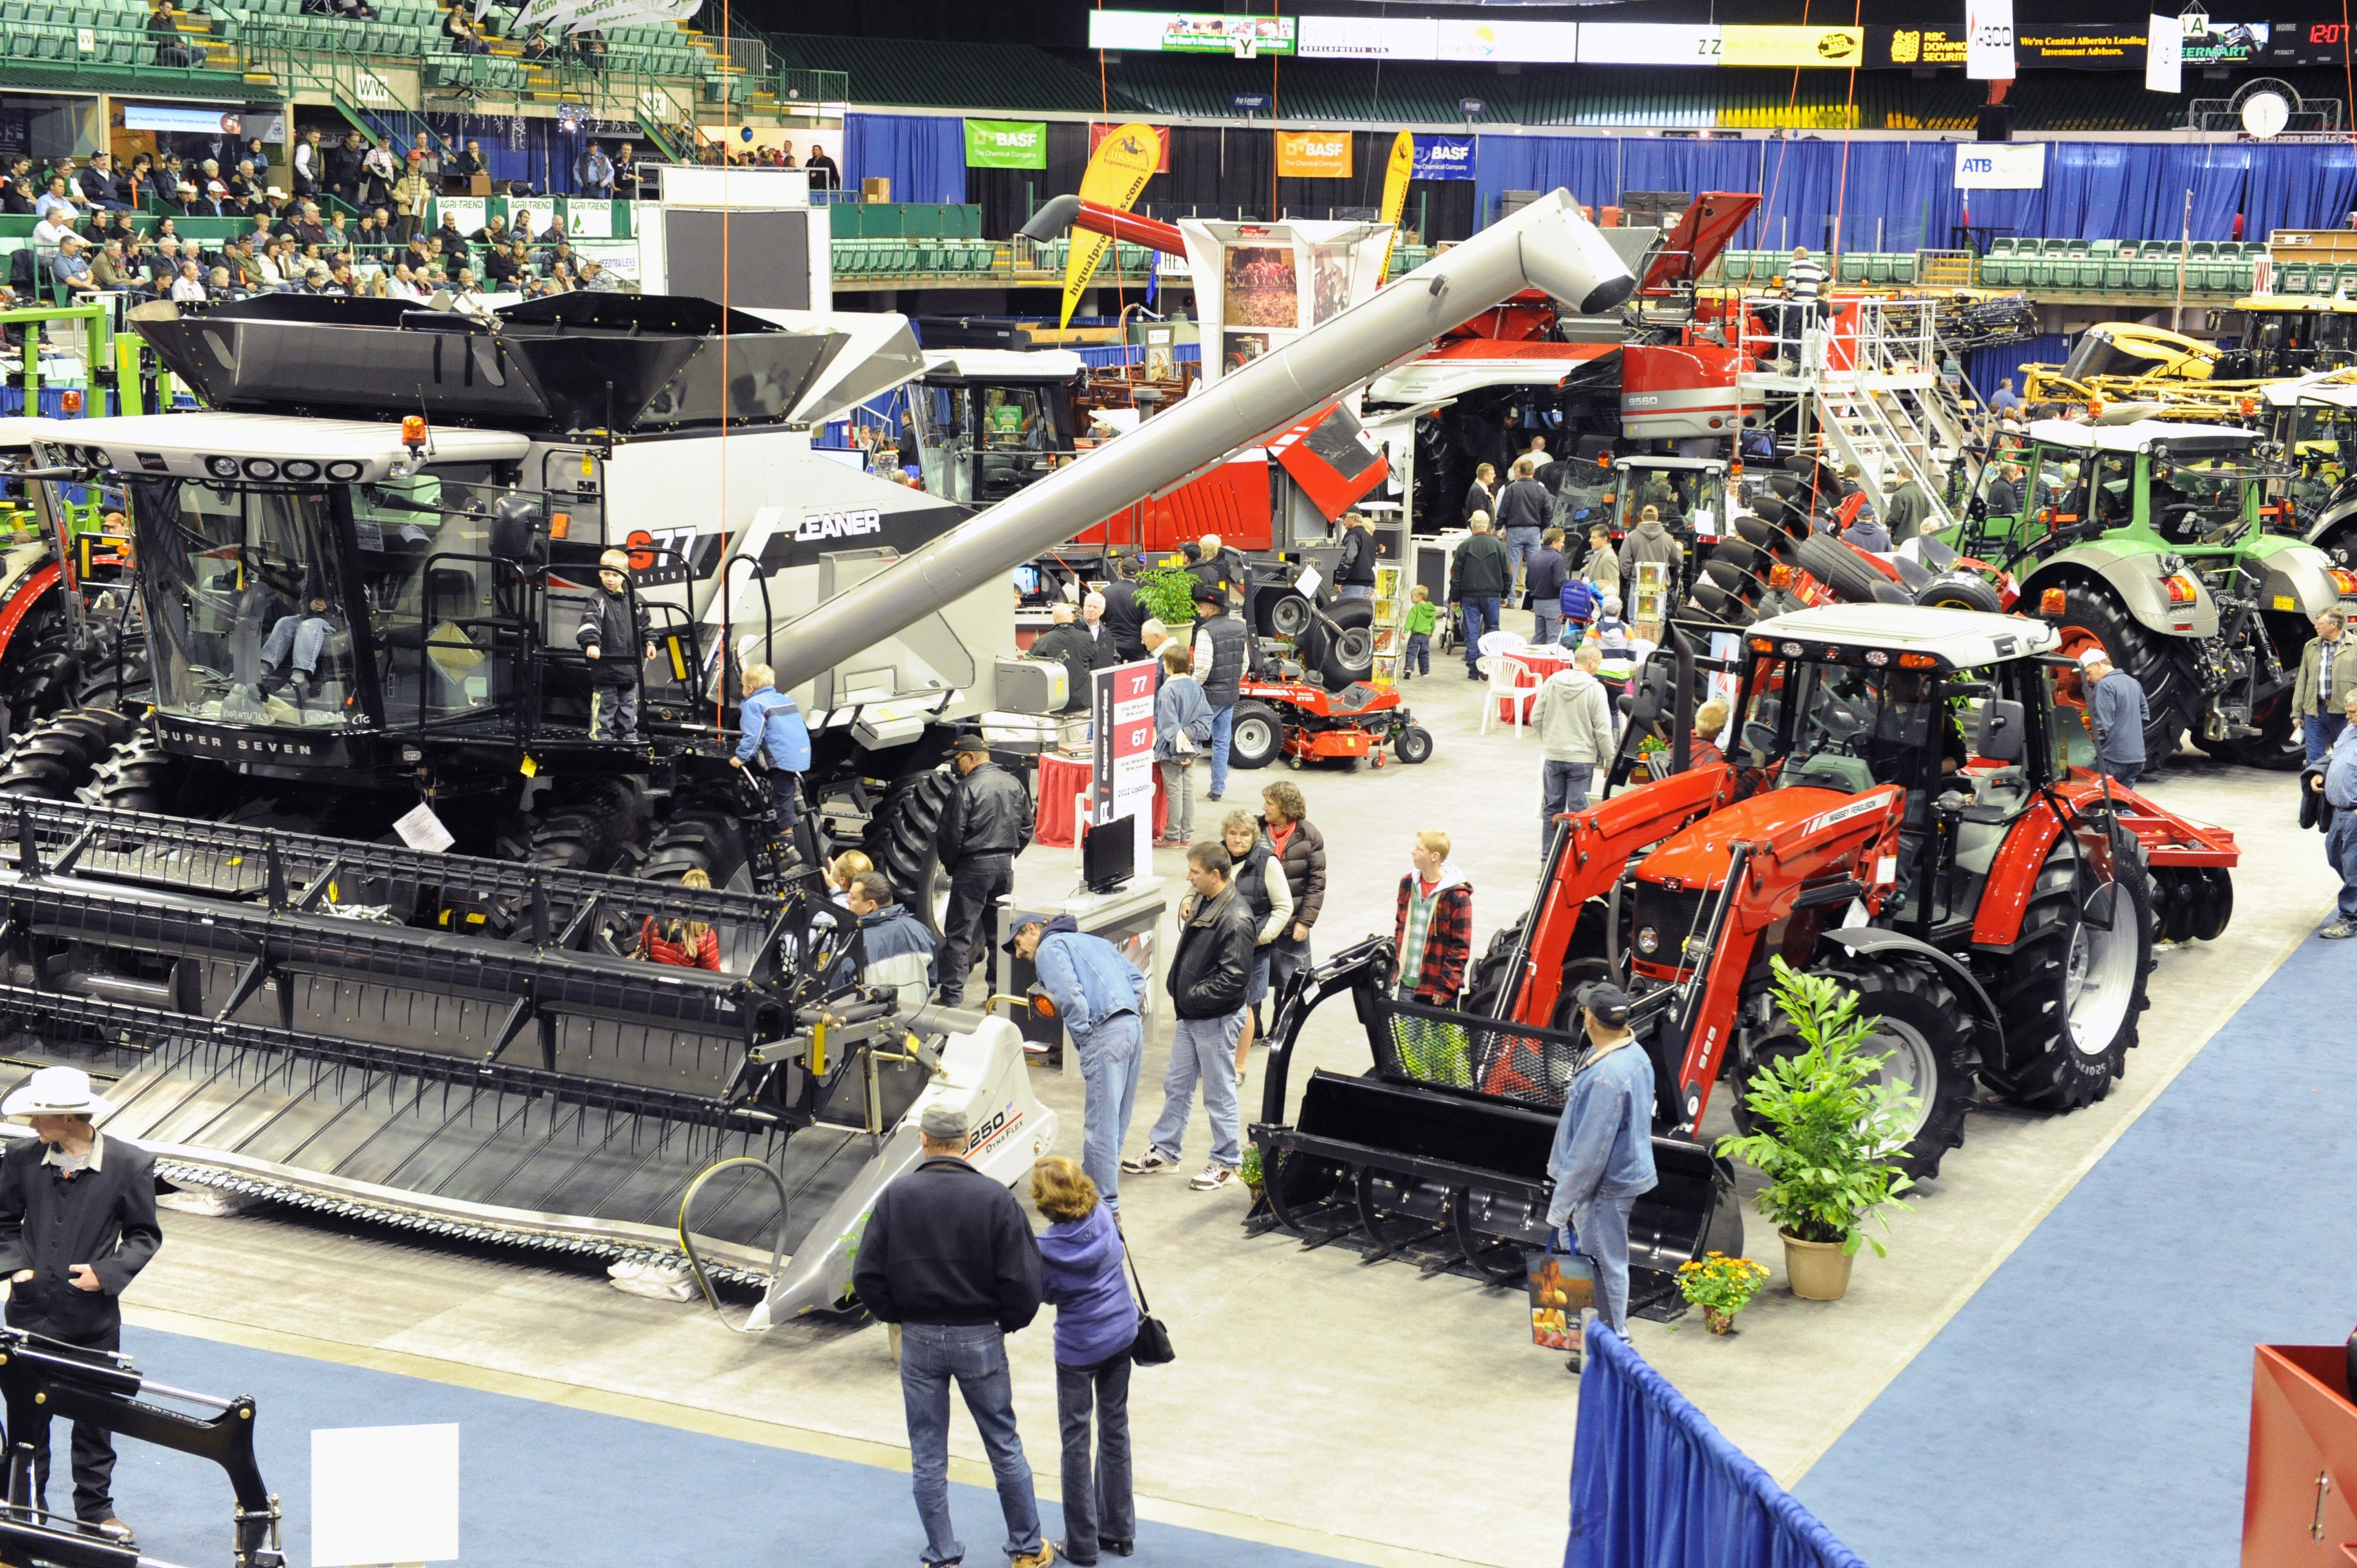 GREAT MACHINES- Thousands of people showed up to view the new agricultural technology at this years' Agri-Trade show at the Westerner this past weekend.